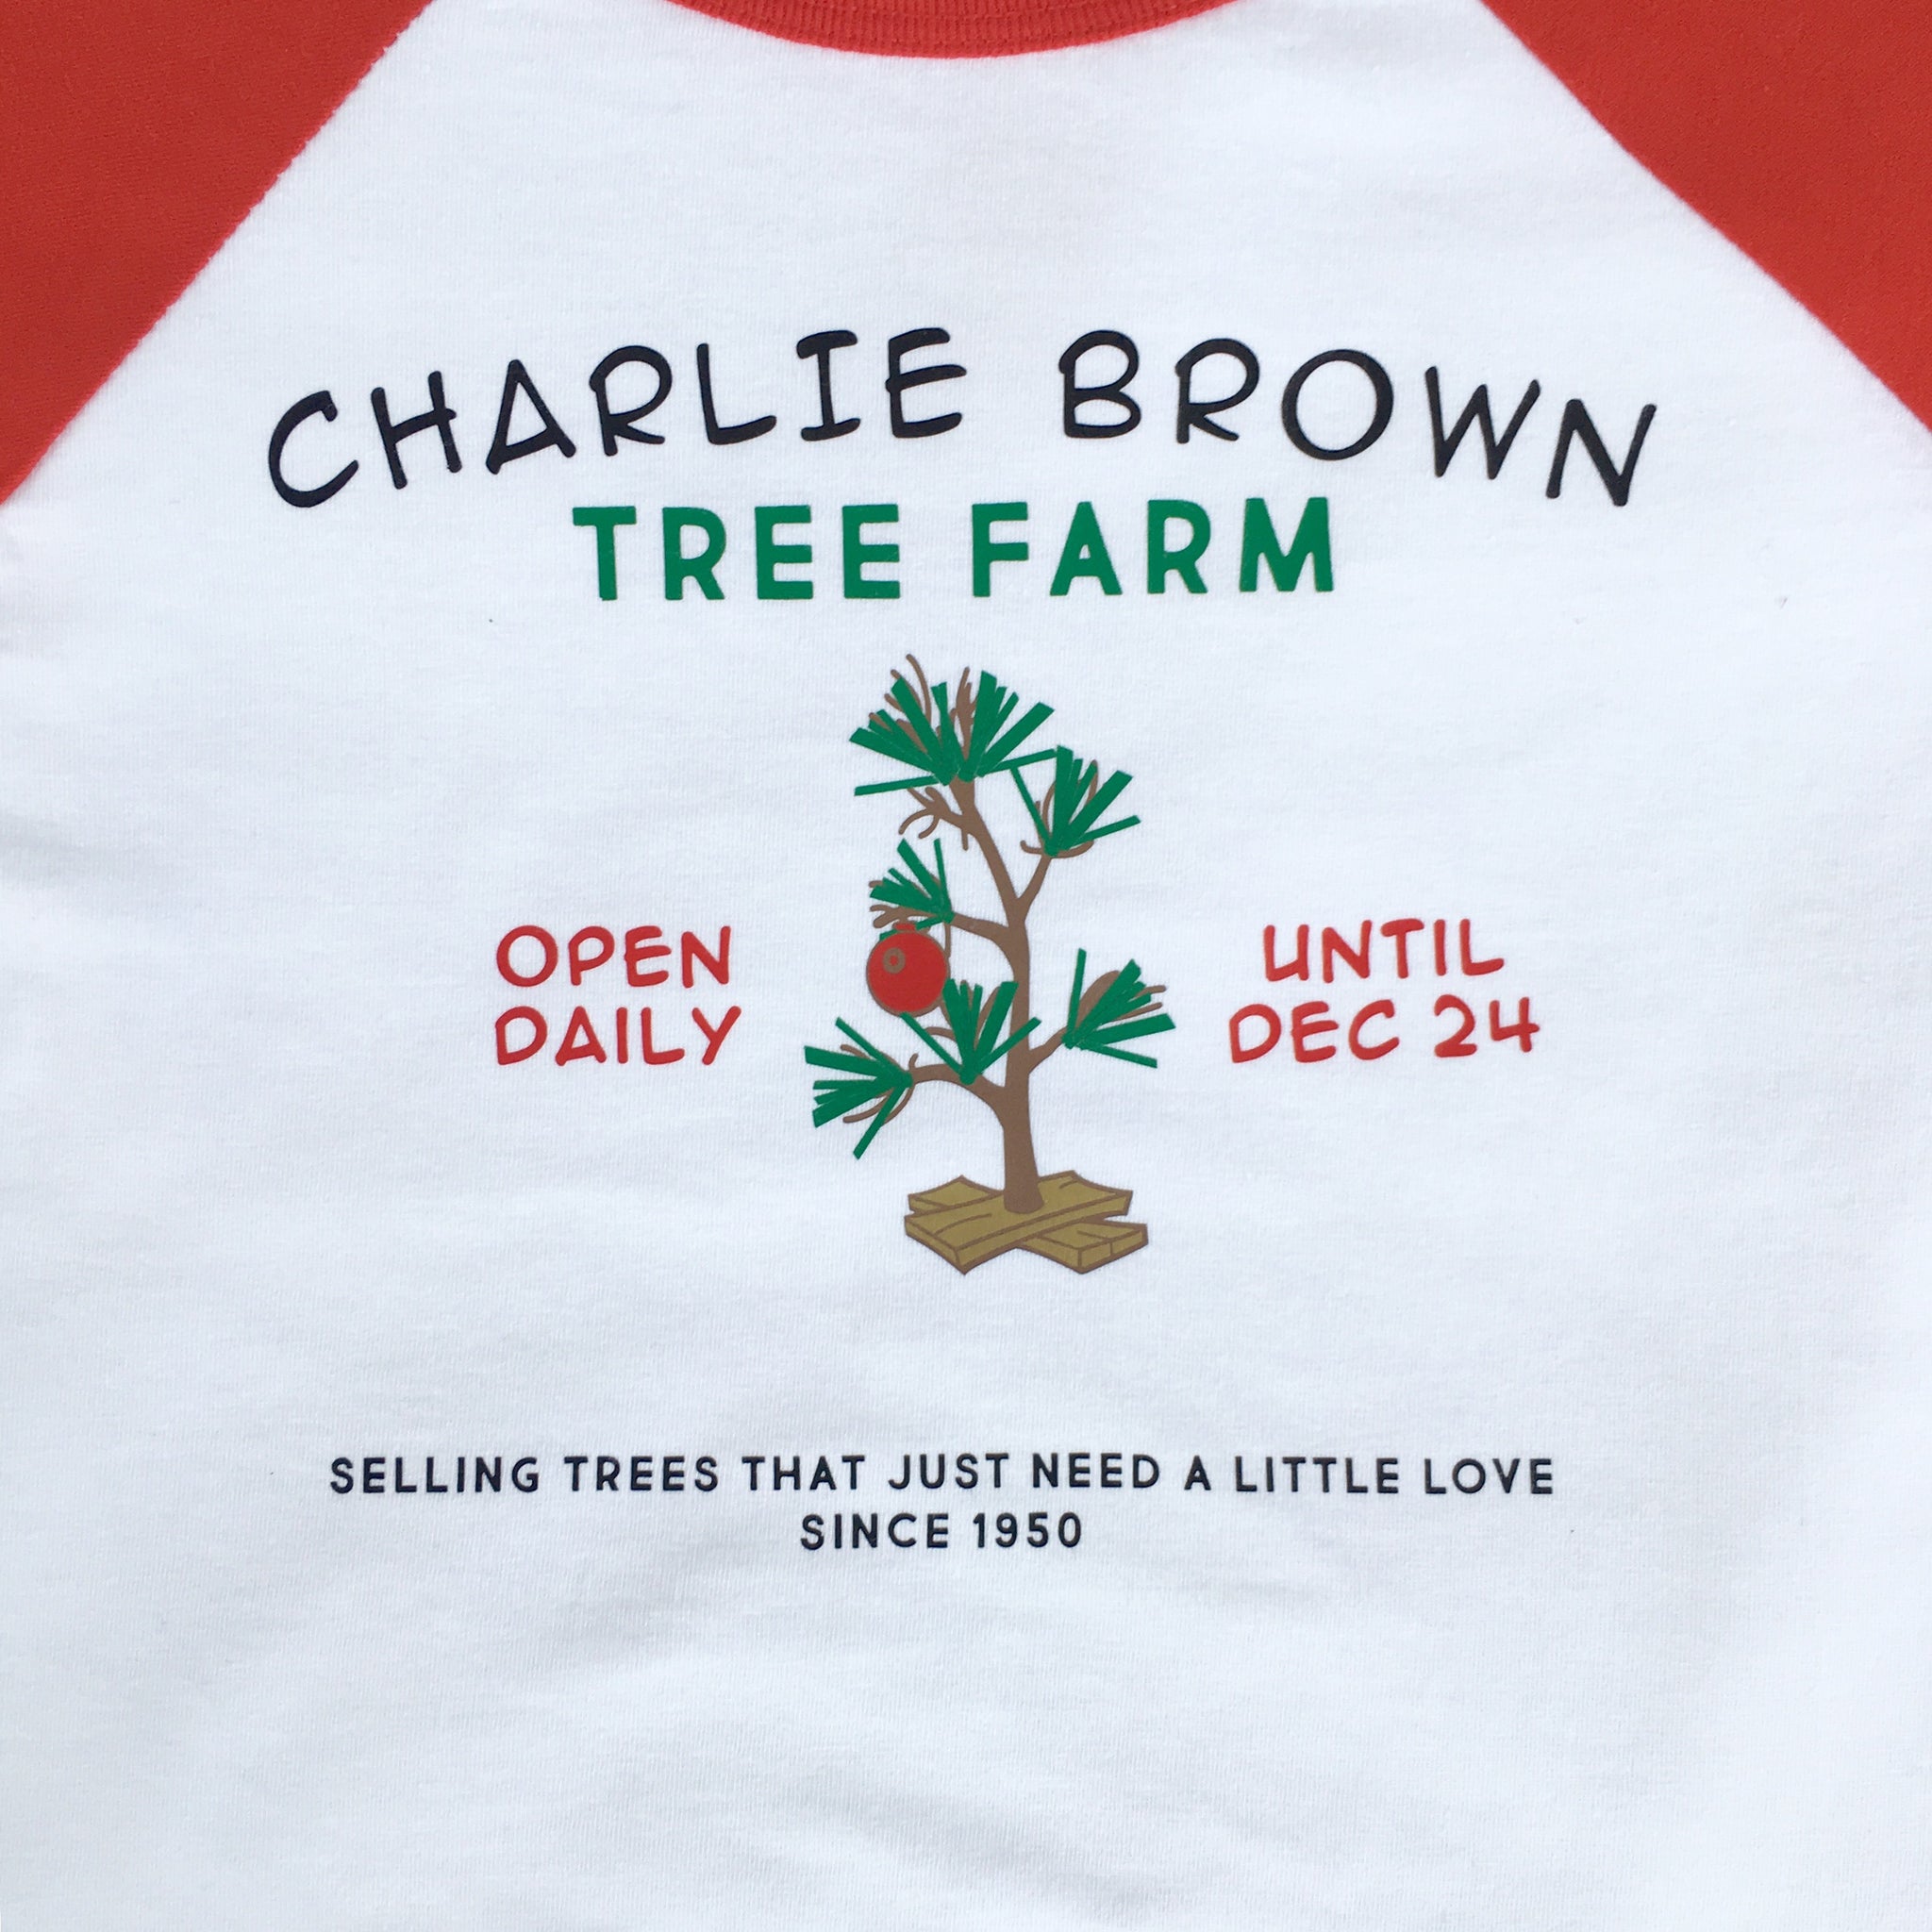 Charlie's Tree Farm Boy or Girl SHIRT ONLY